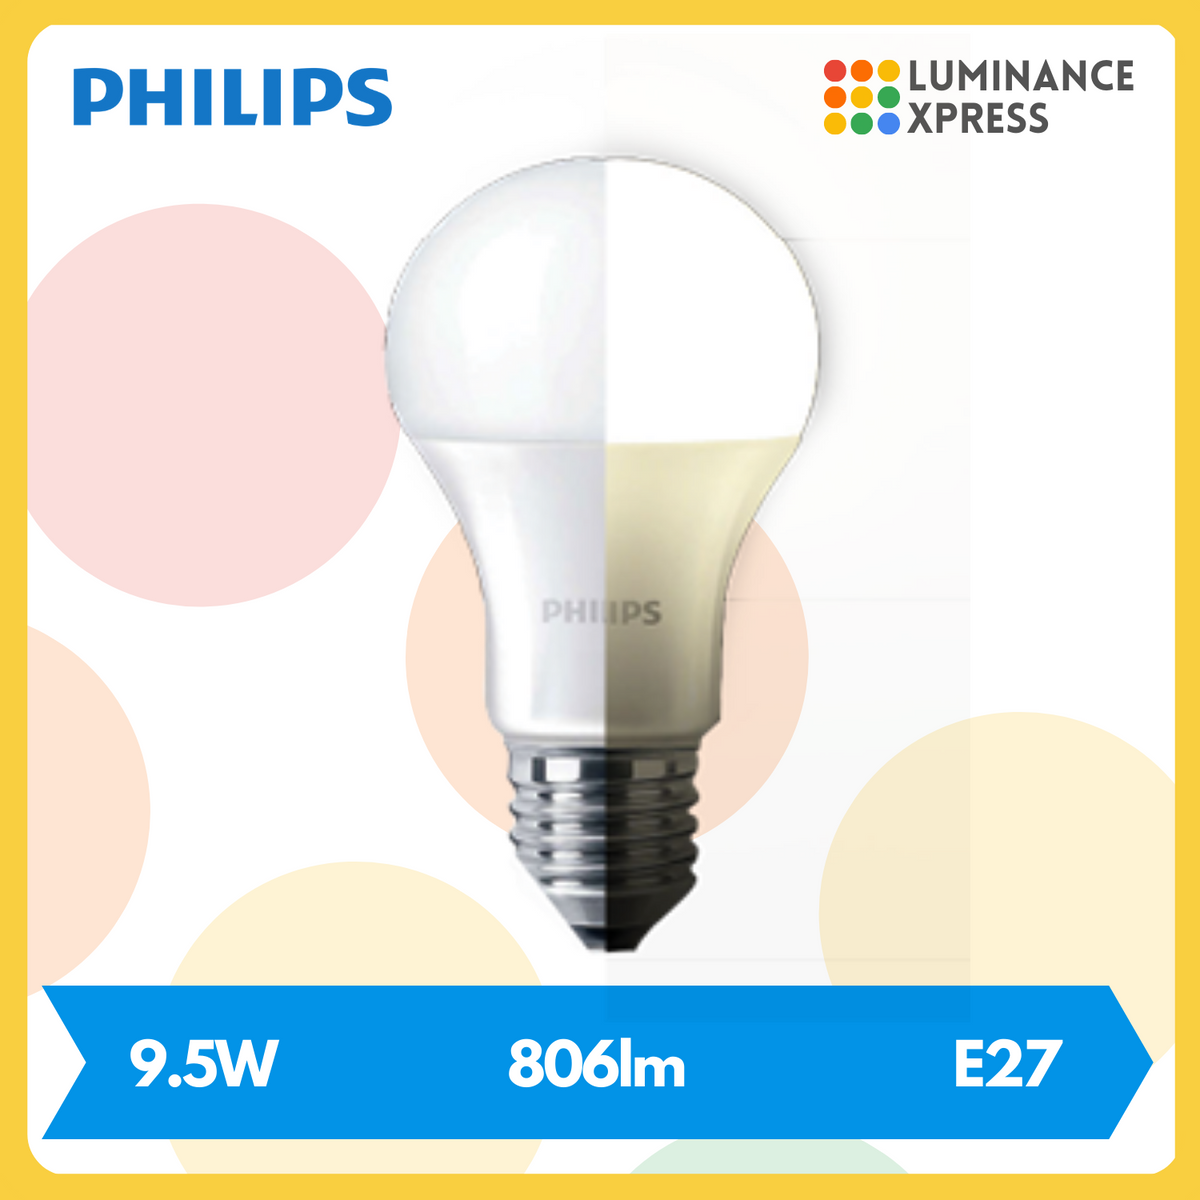 Blootstellen Scully Verslaafd PHILIPS LED Scene Switch Bulb 9.5W Duo Colour E27 — LUMINANCE SYSTEMS